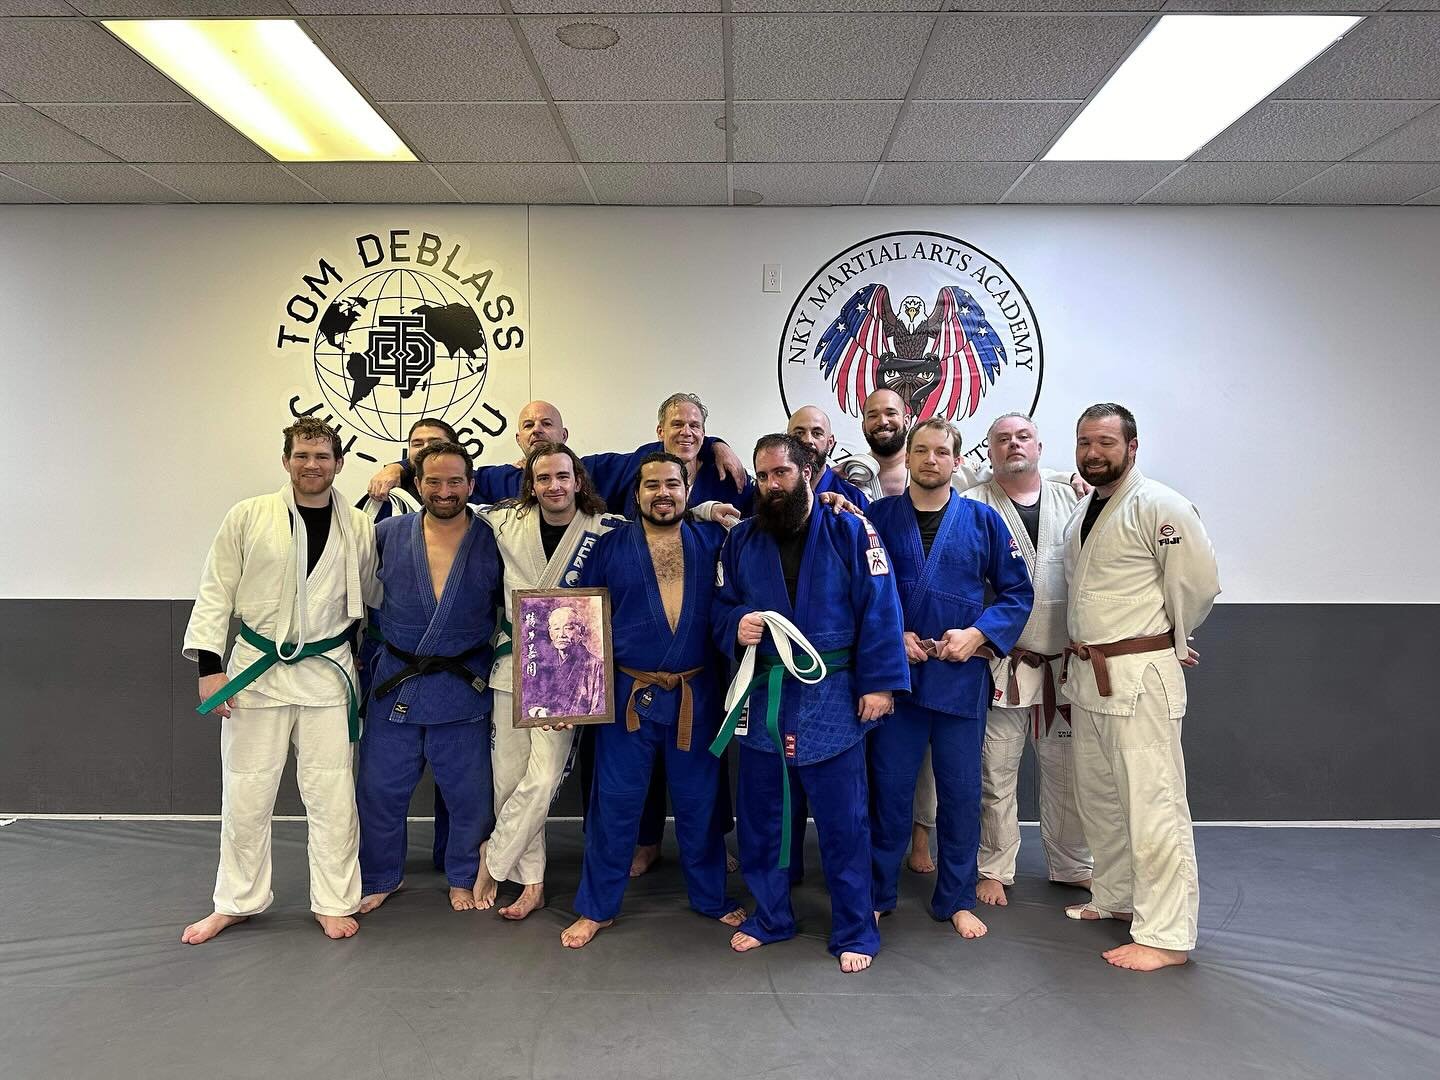 Congrats to everyone who got promoted last night in our Judo class! 👏💯 Check out our Judo classes Monday at 7:00pm and Wednesdays at 6:15. 

#judo #judolifestyle #judofamily #beltpromotion